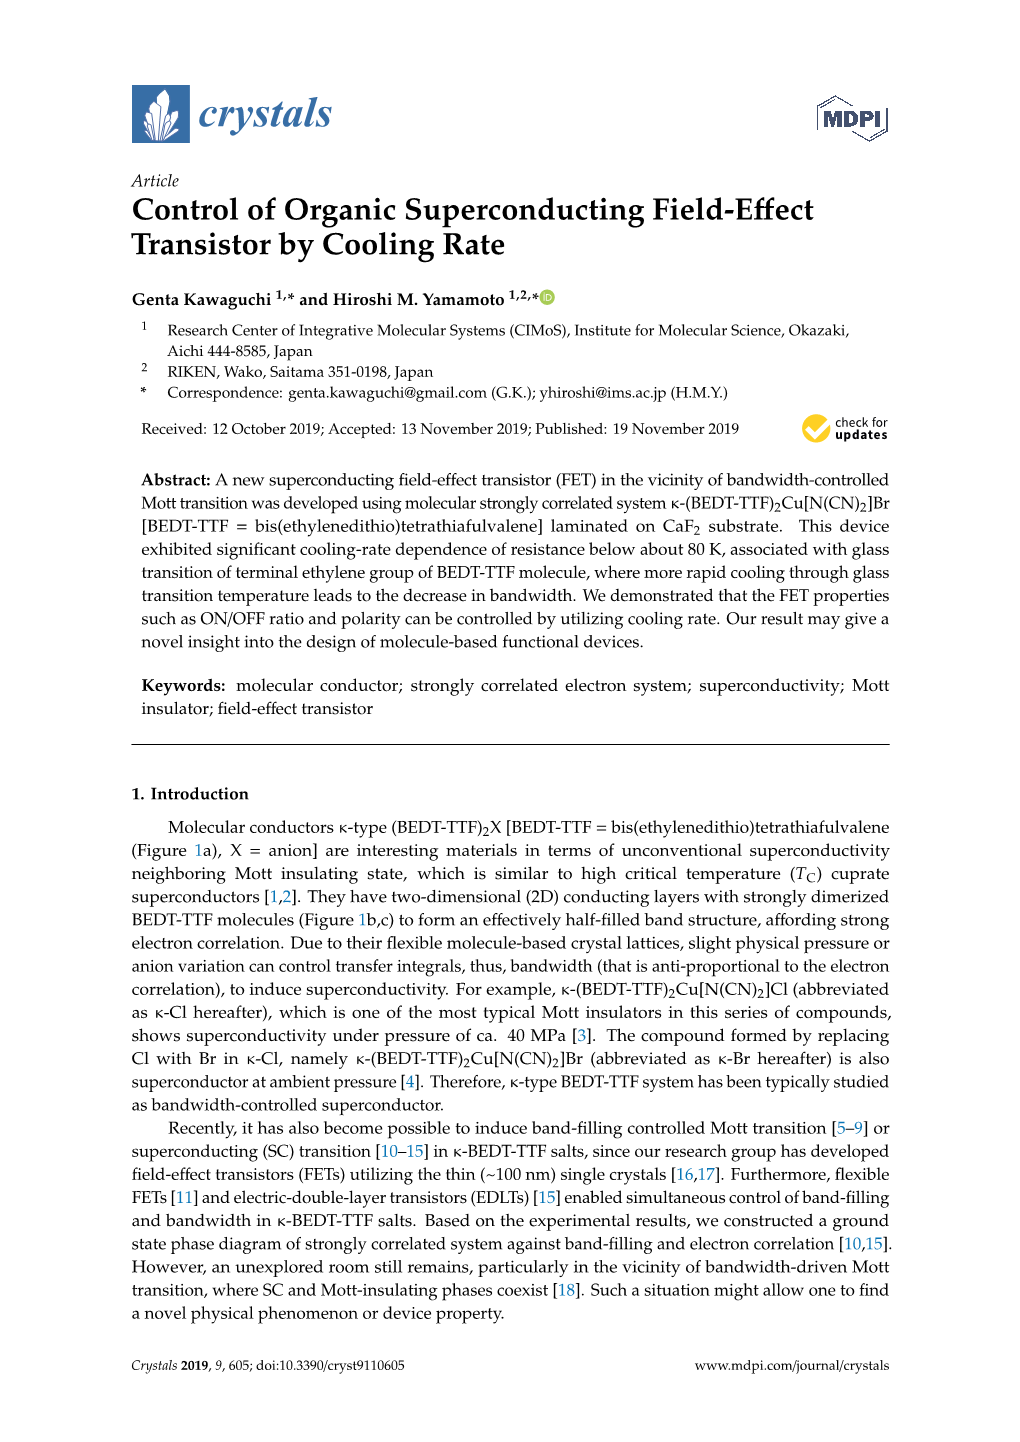 Control of Organic Superconducting Field-Effect Transistor by Cooling